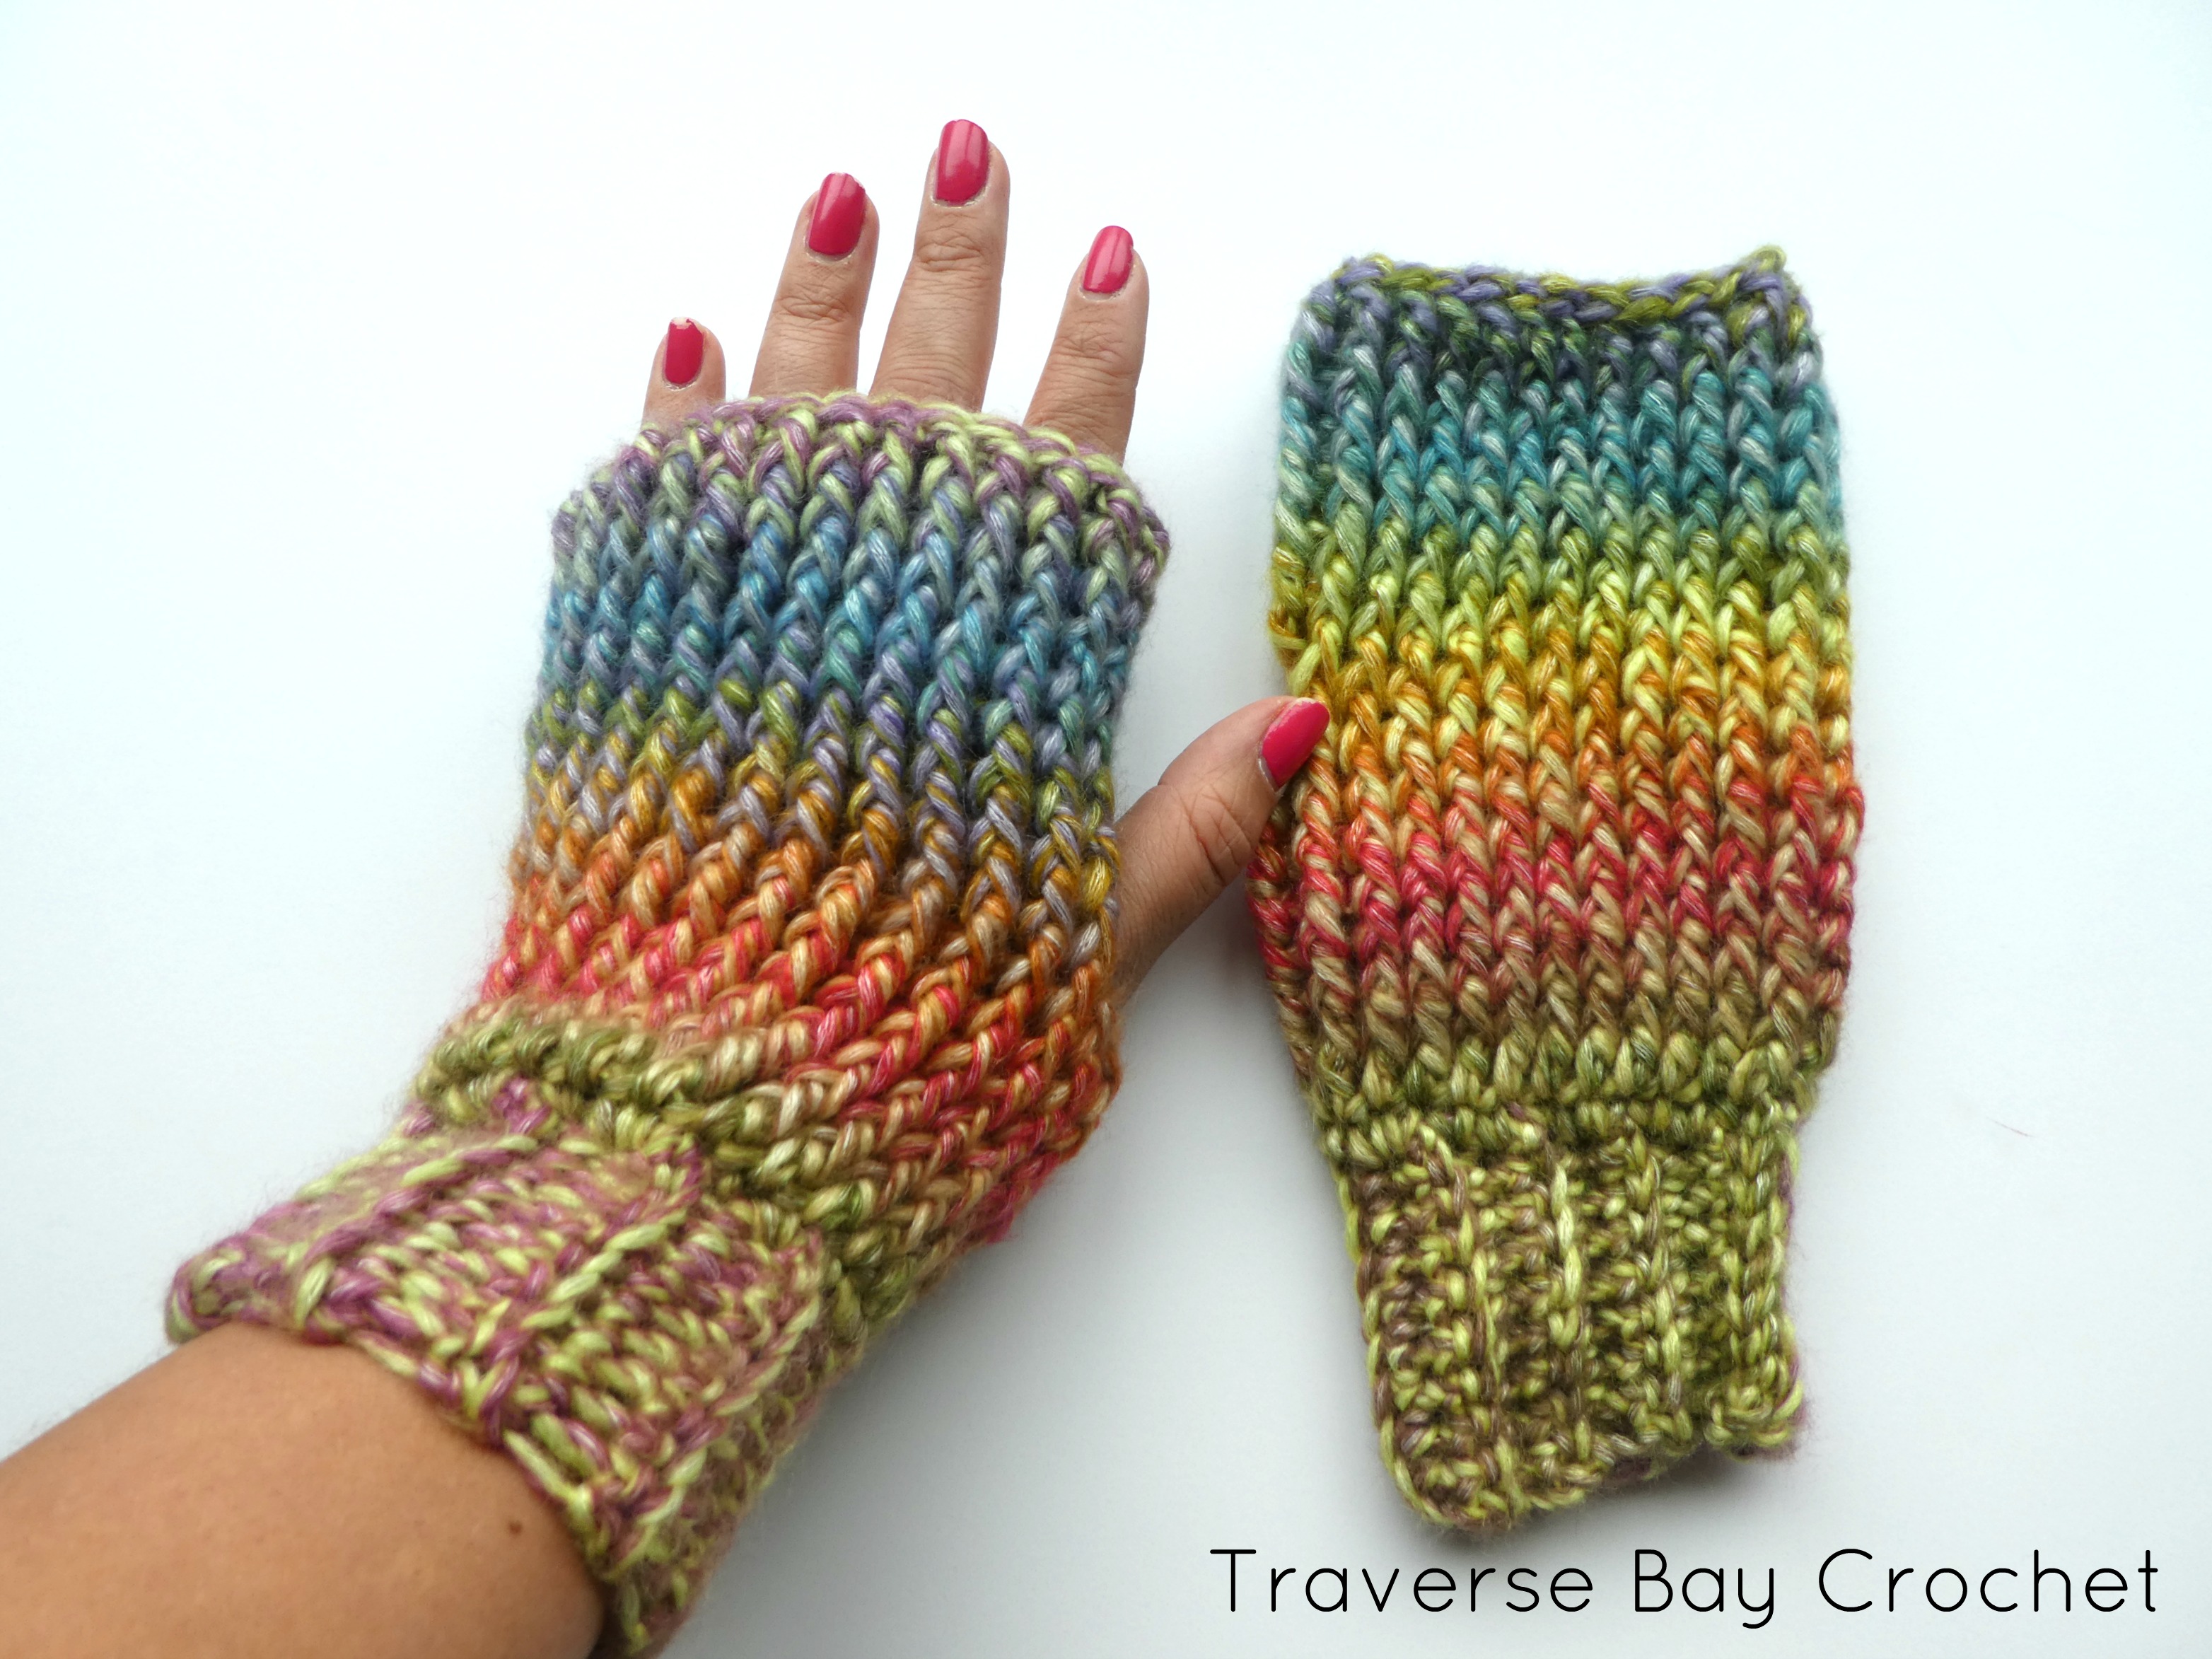 Up North Crochet Fingerless Mitten - This list of 20 easy fingerless gloves crochet patterns is suitable for everyone, including males, females, adults, and children. #FingerlessGlovesCrochetPatterns #CrochetFingerlessGloves #CrochetPatterns